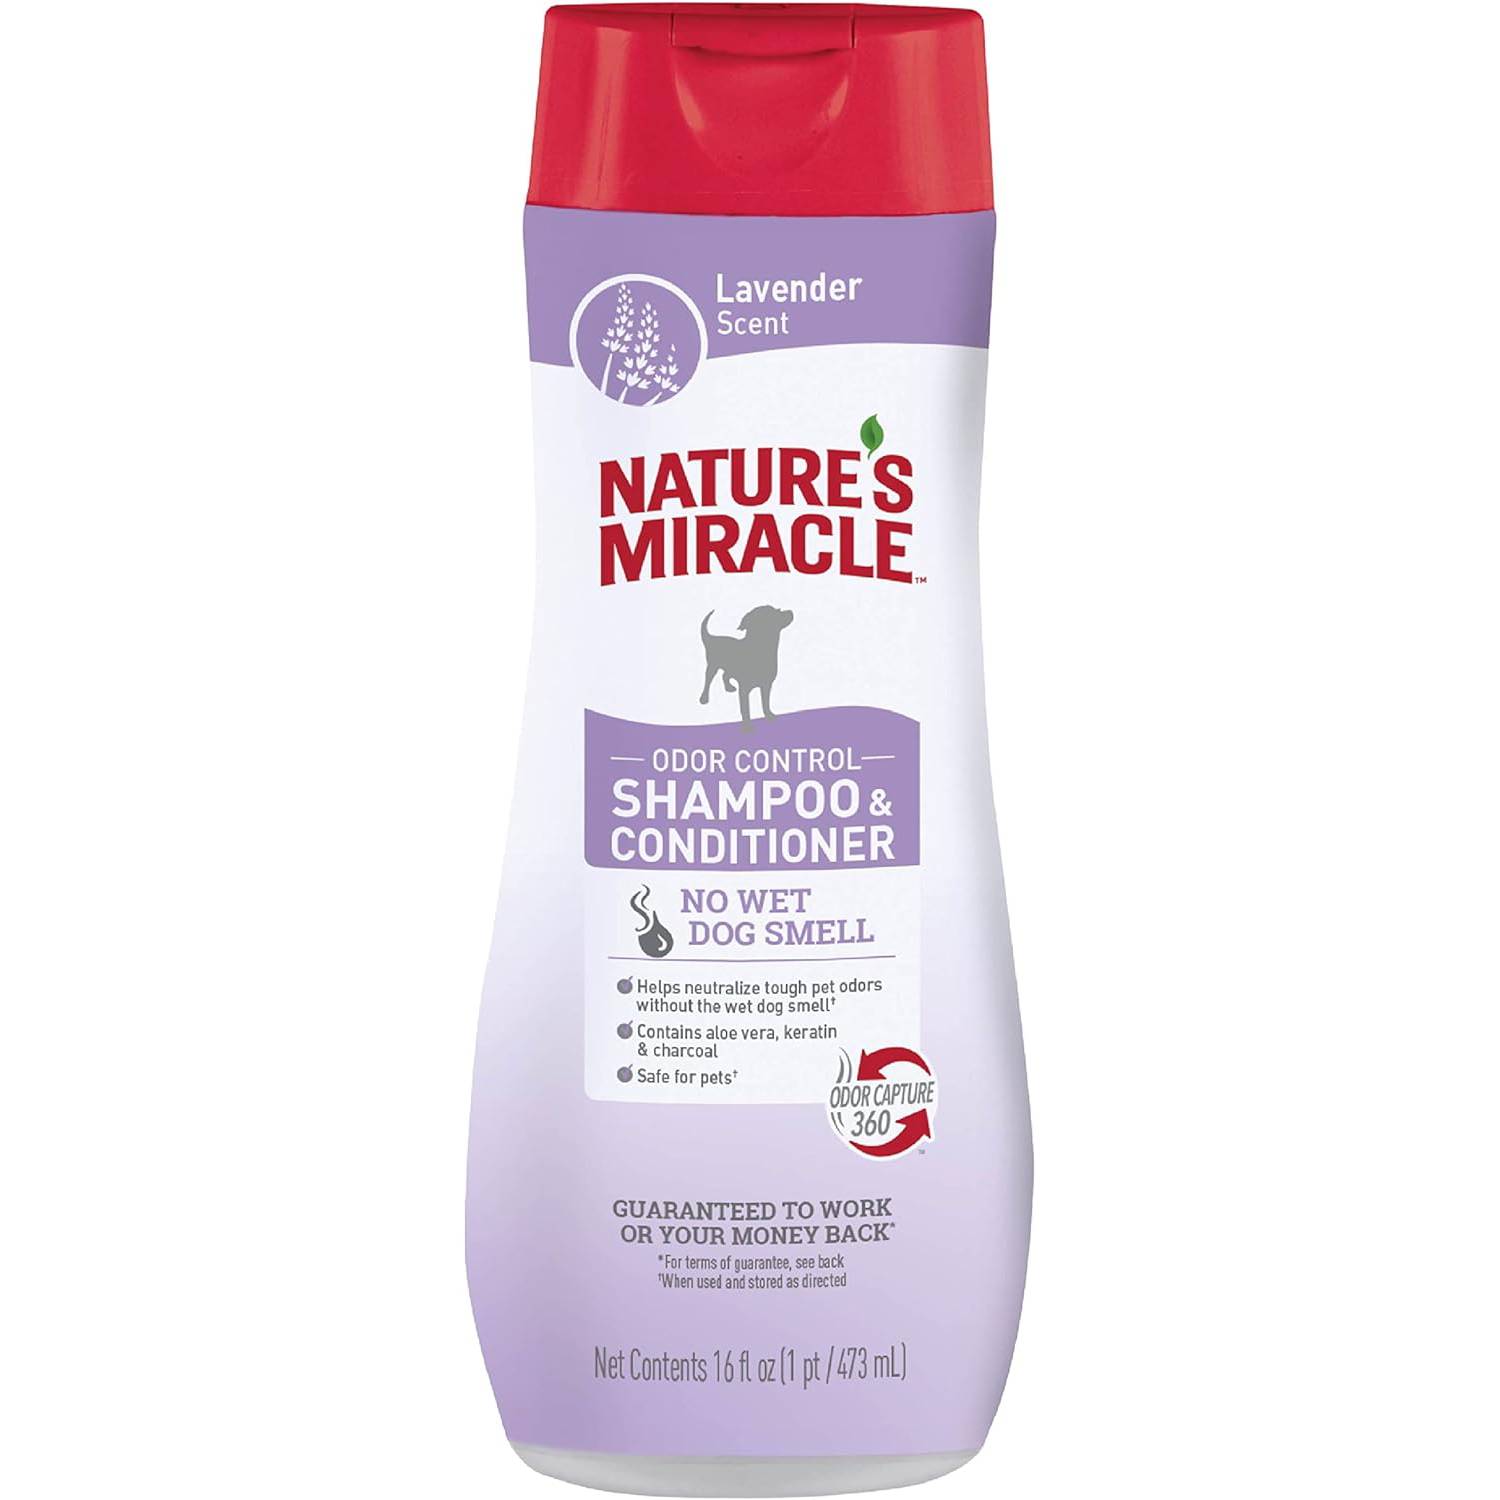 Nature's Miracle Nature’s Miracle Odor Control Shampoo & Conditioner